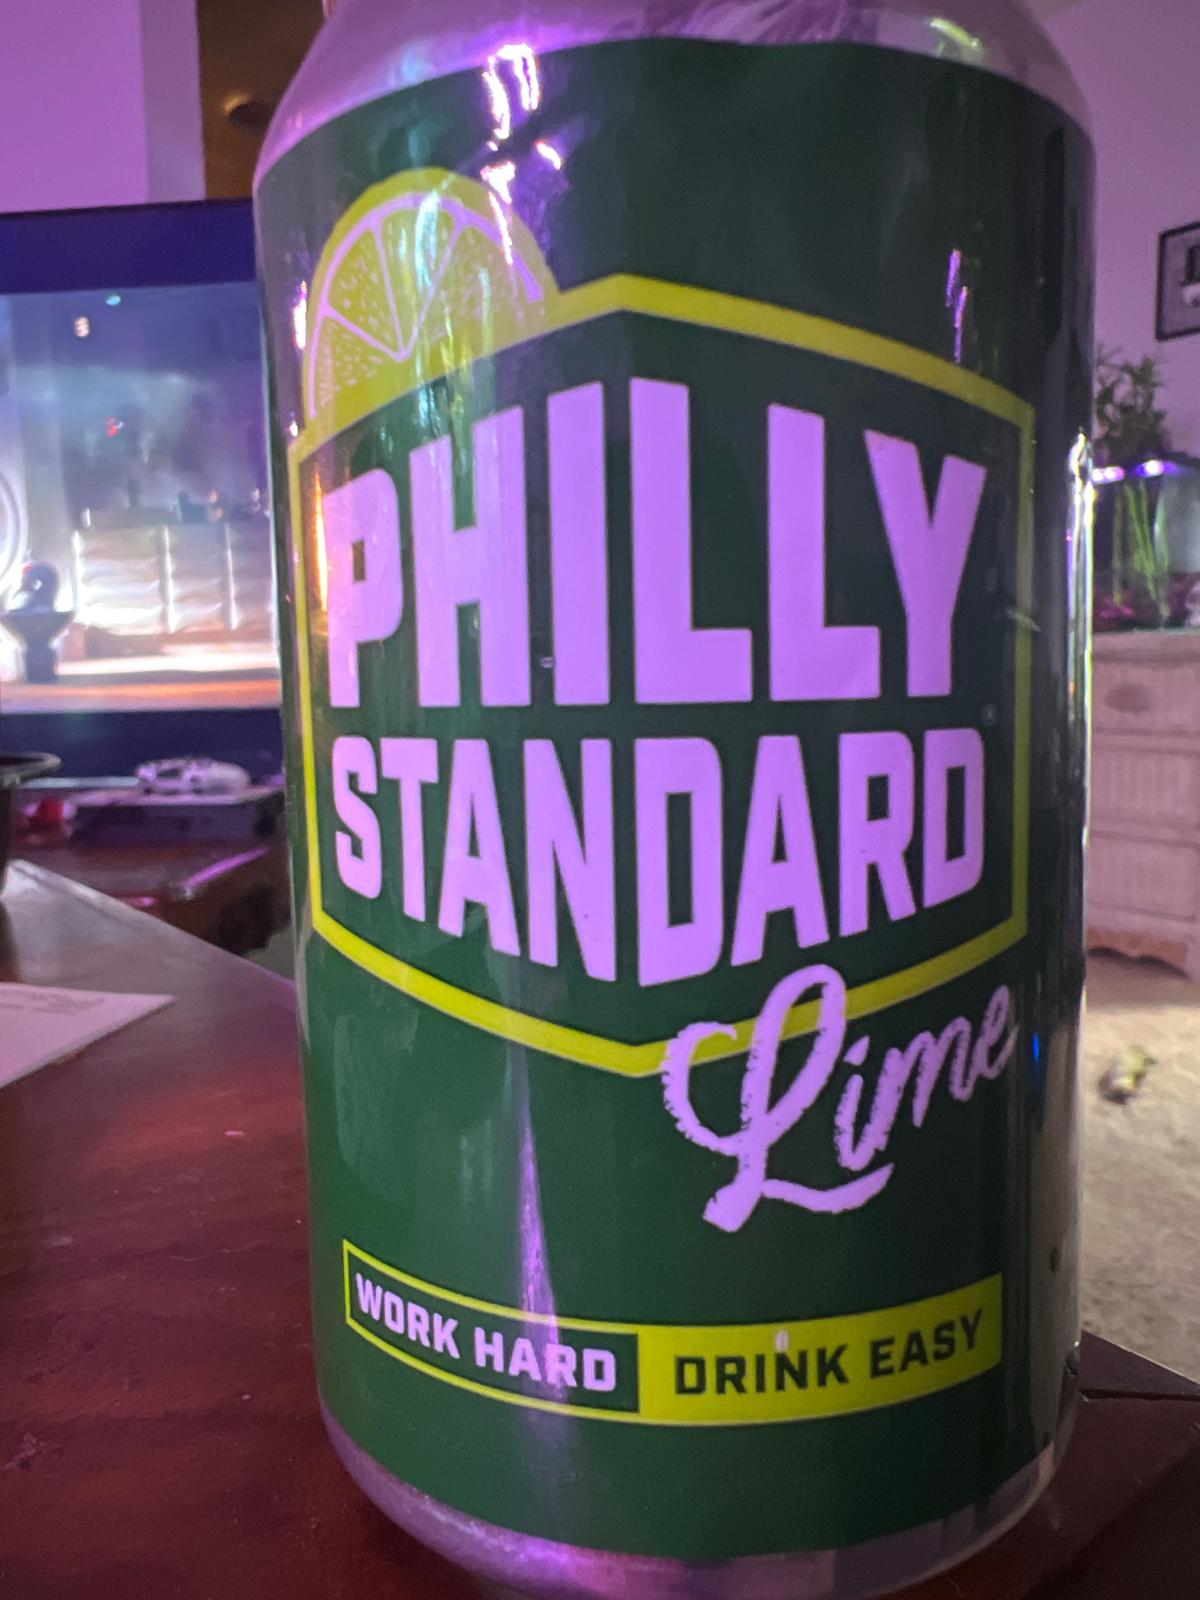 Philly Standard Lime